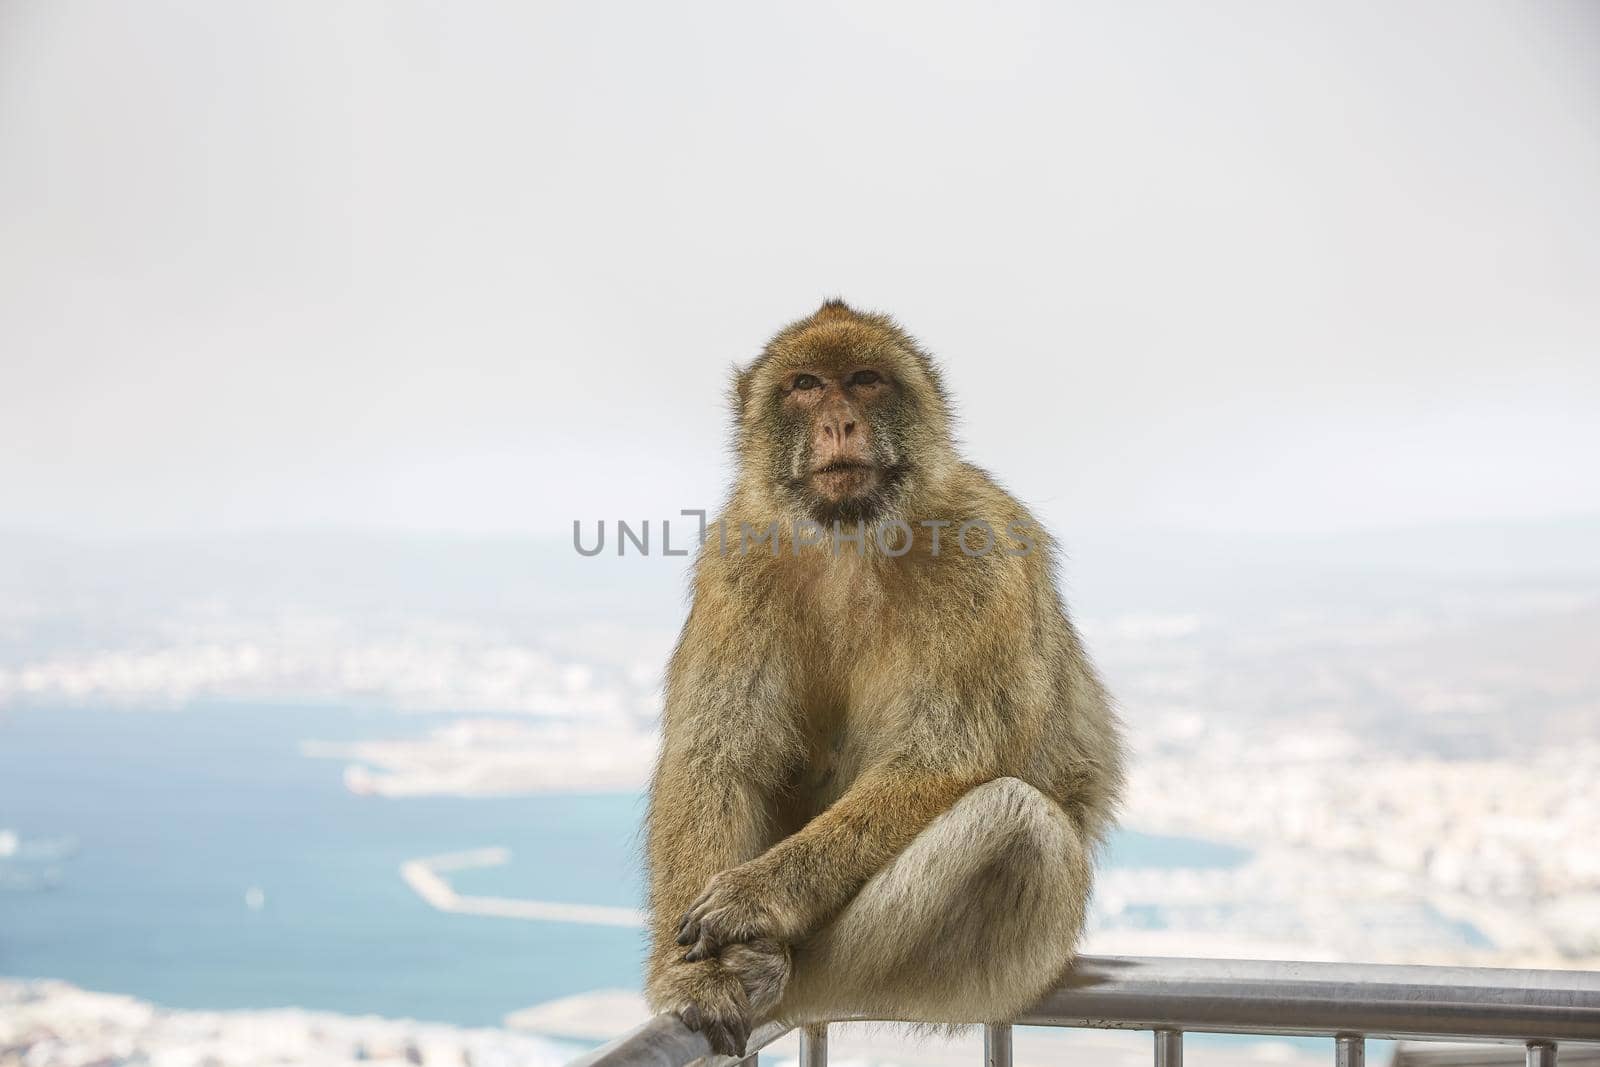 The Barbary Macaque monkeys of Gibraltar by wondry